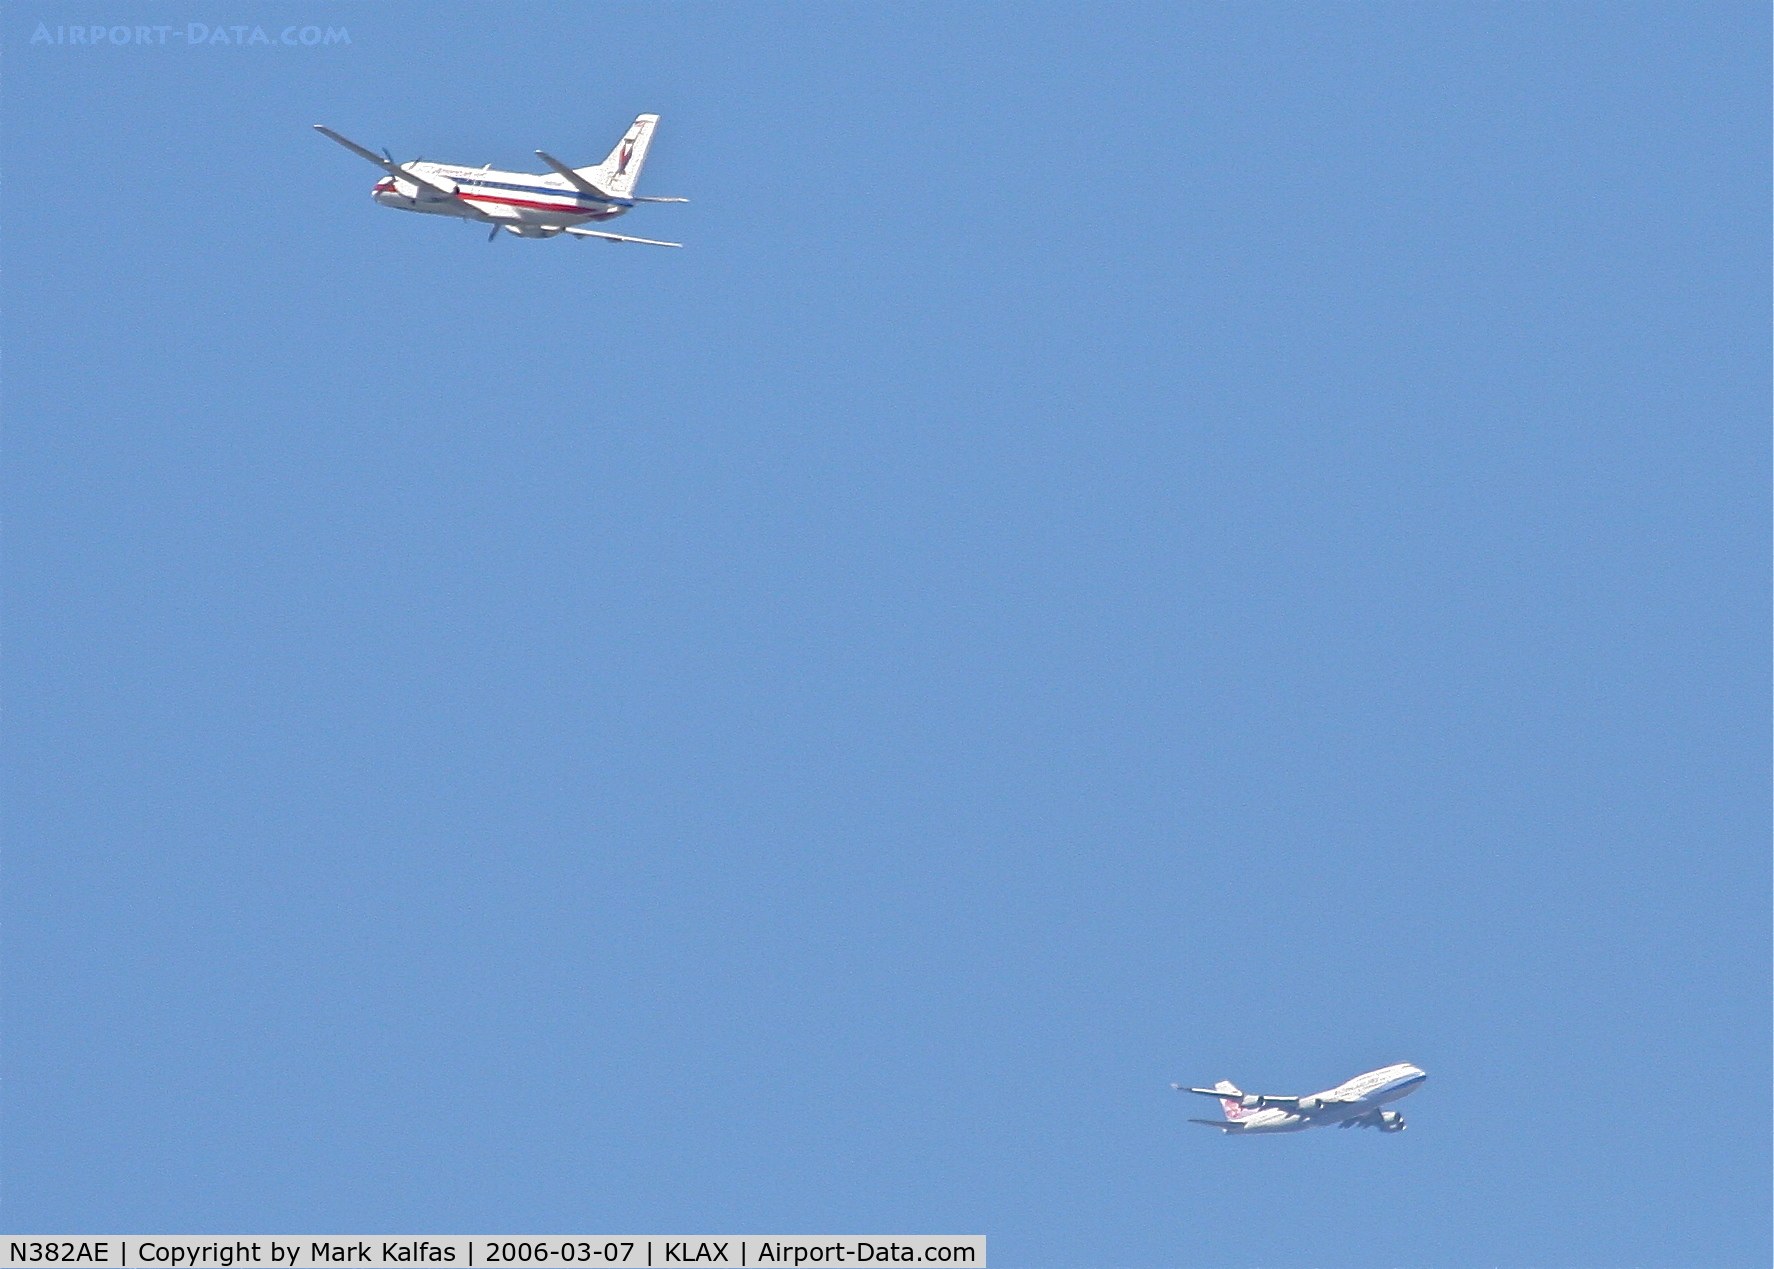 N382AE, Saab 340B C/N 340B-382, American Eagle SAAB 340B, 25R departure and Air China 744 downwind over SMO for the north complex KLAX.